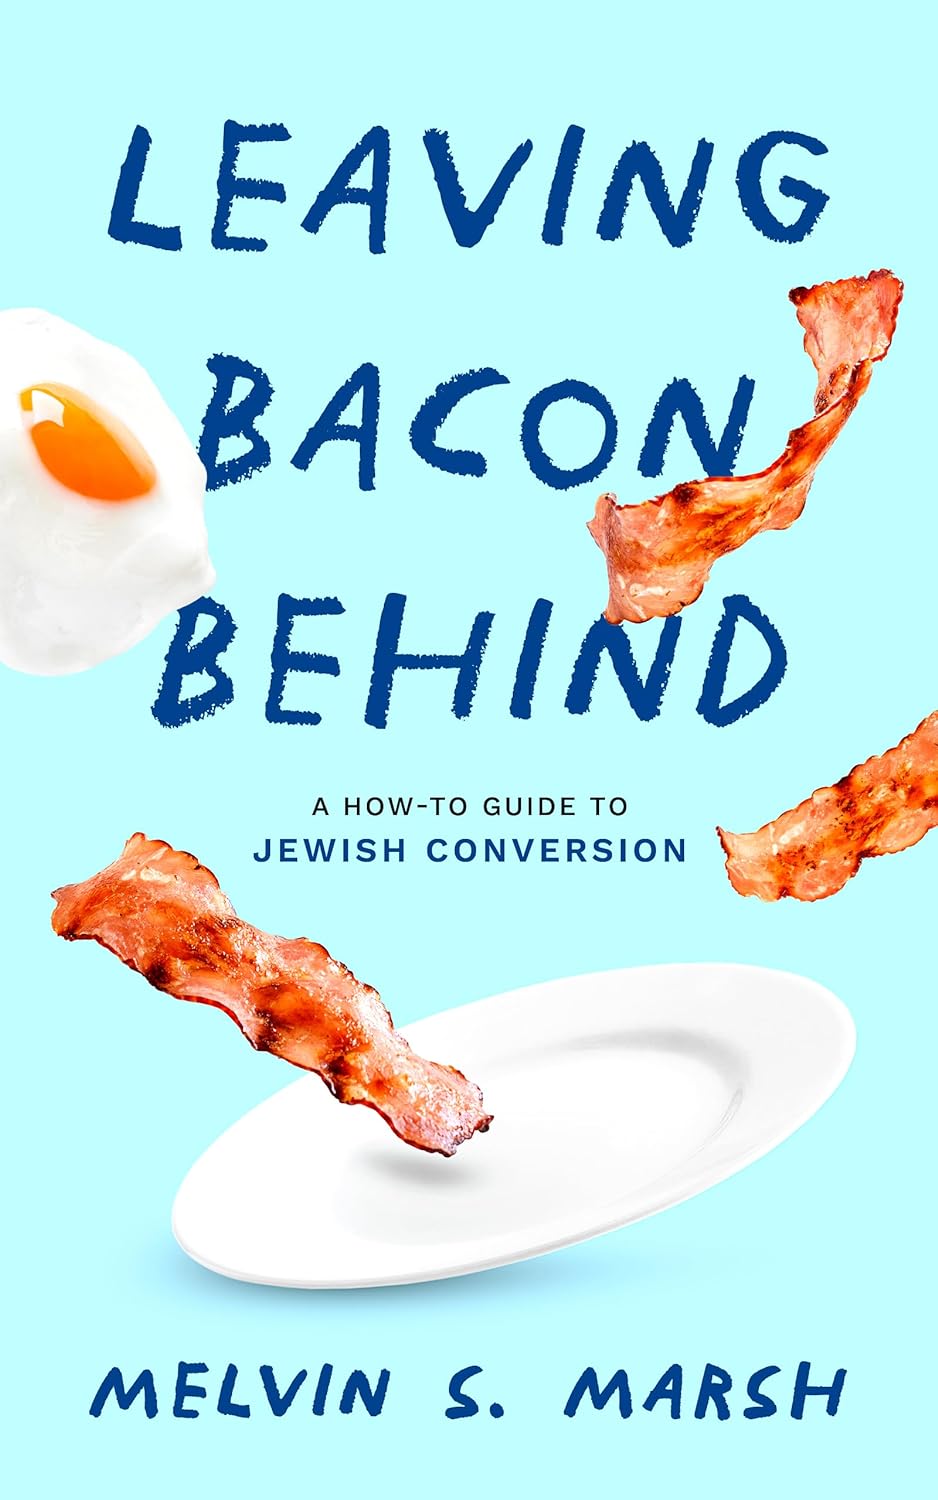 New book "Leaving Bacon Behind" by Melvin S. Marsh is released, a nuanced, easy-to-read guide to converting to Judaism for people of all backgrounds